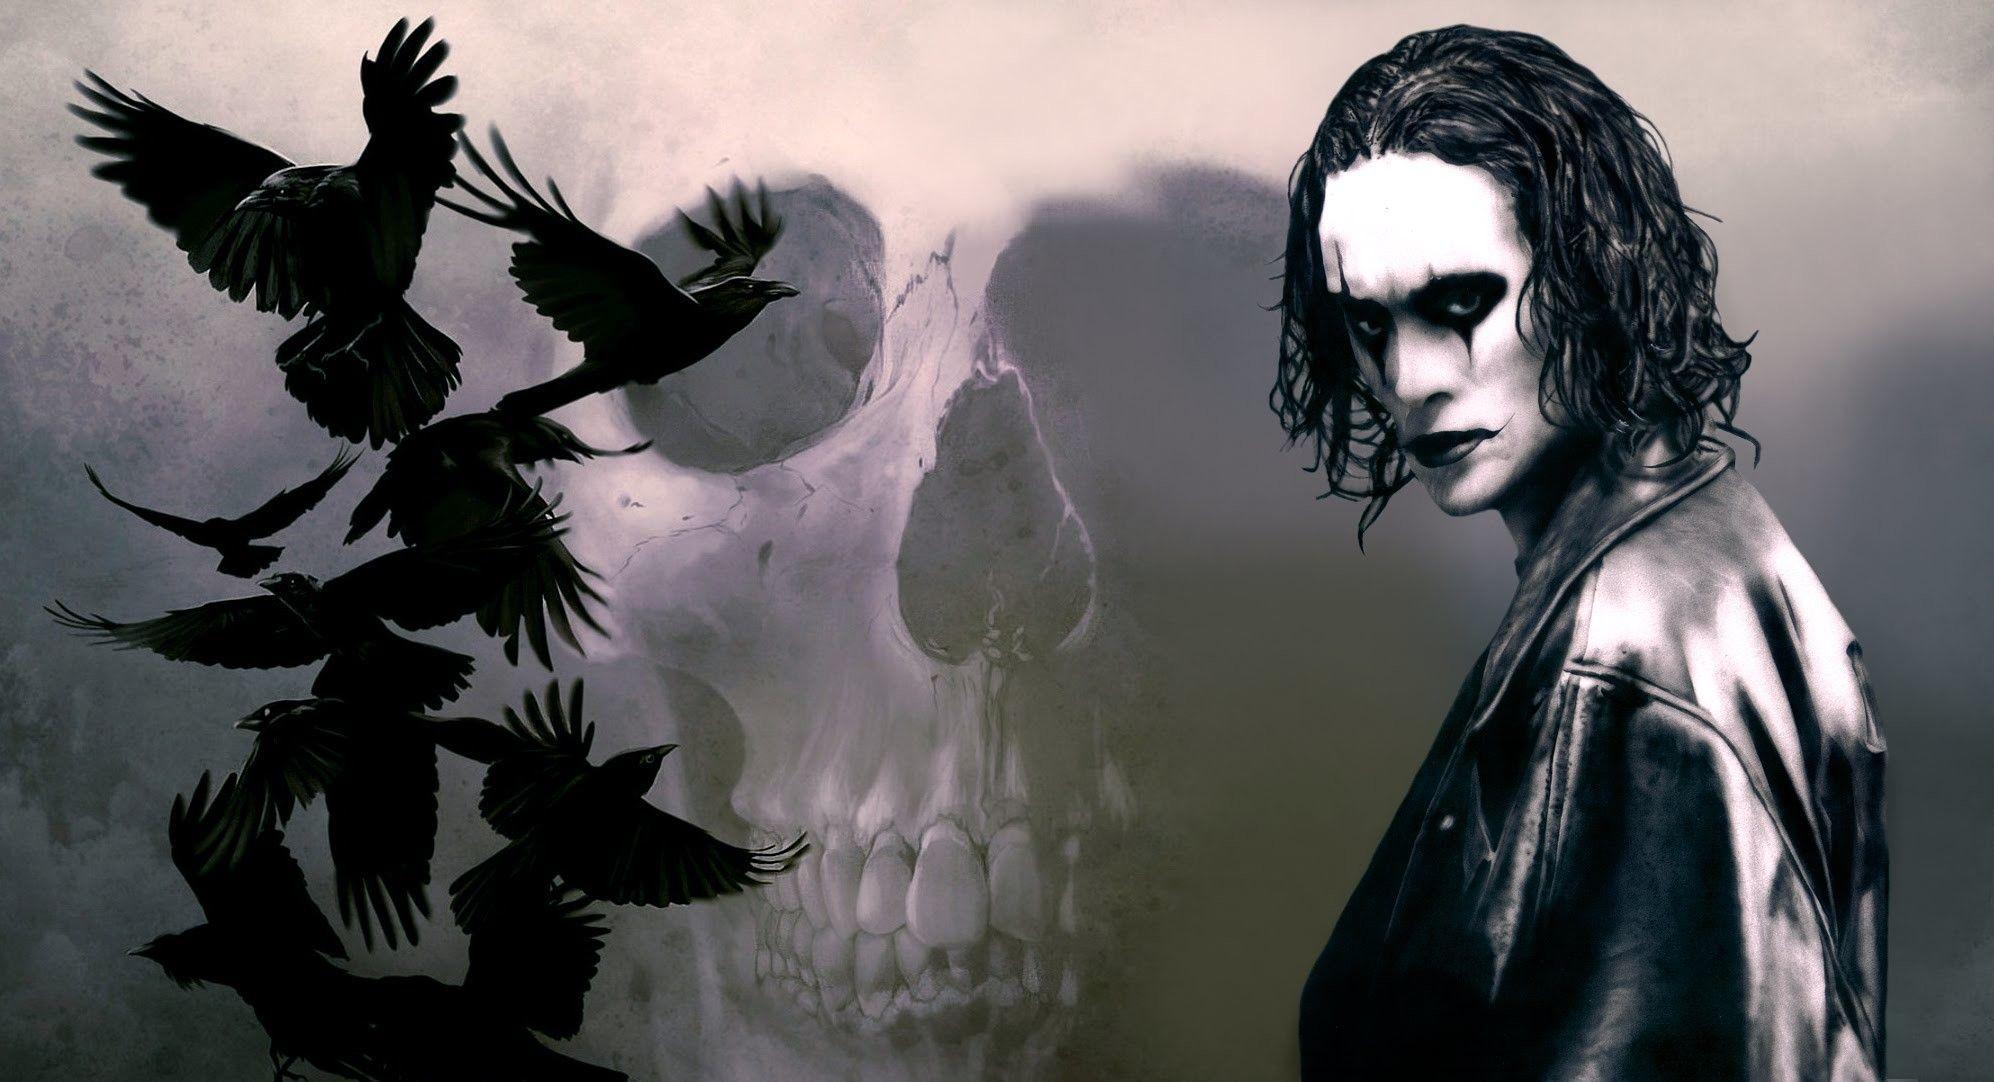 The Crow Wallpapers - Top Free The Crow